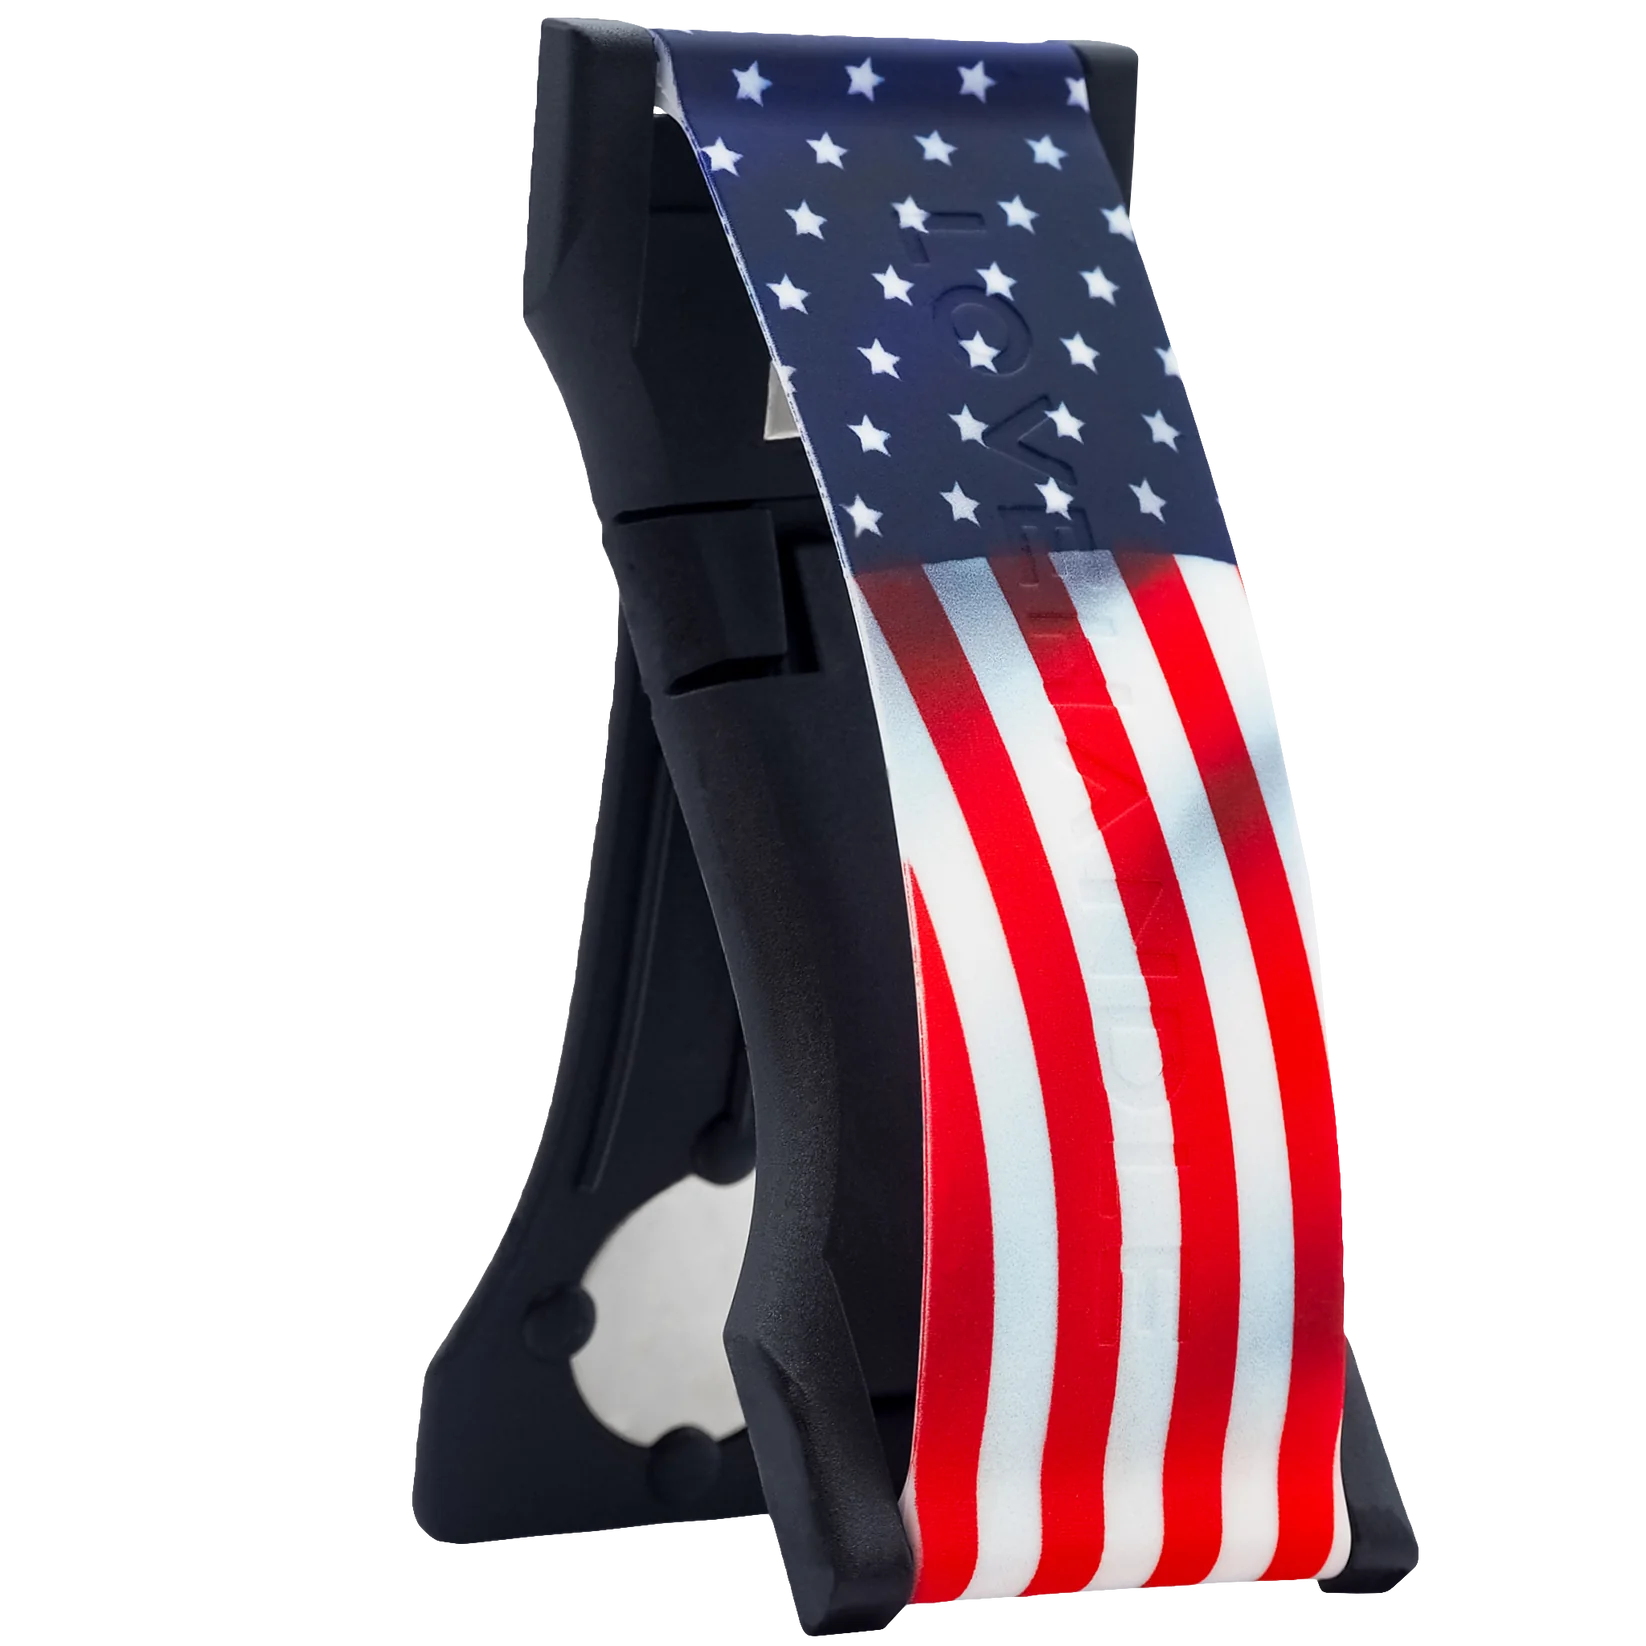 LOVEHANDLE PRO - WAVY AMERICAN FLAG SILICONE